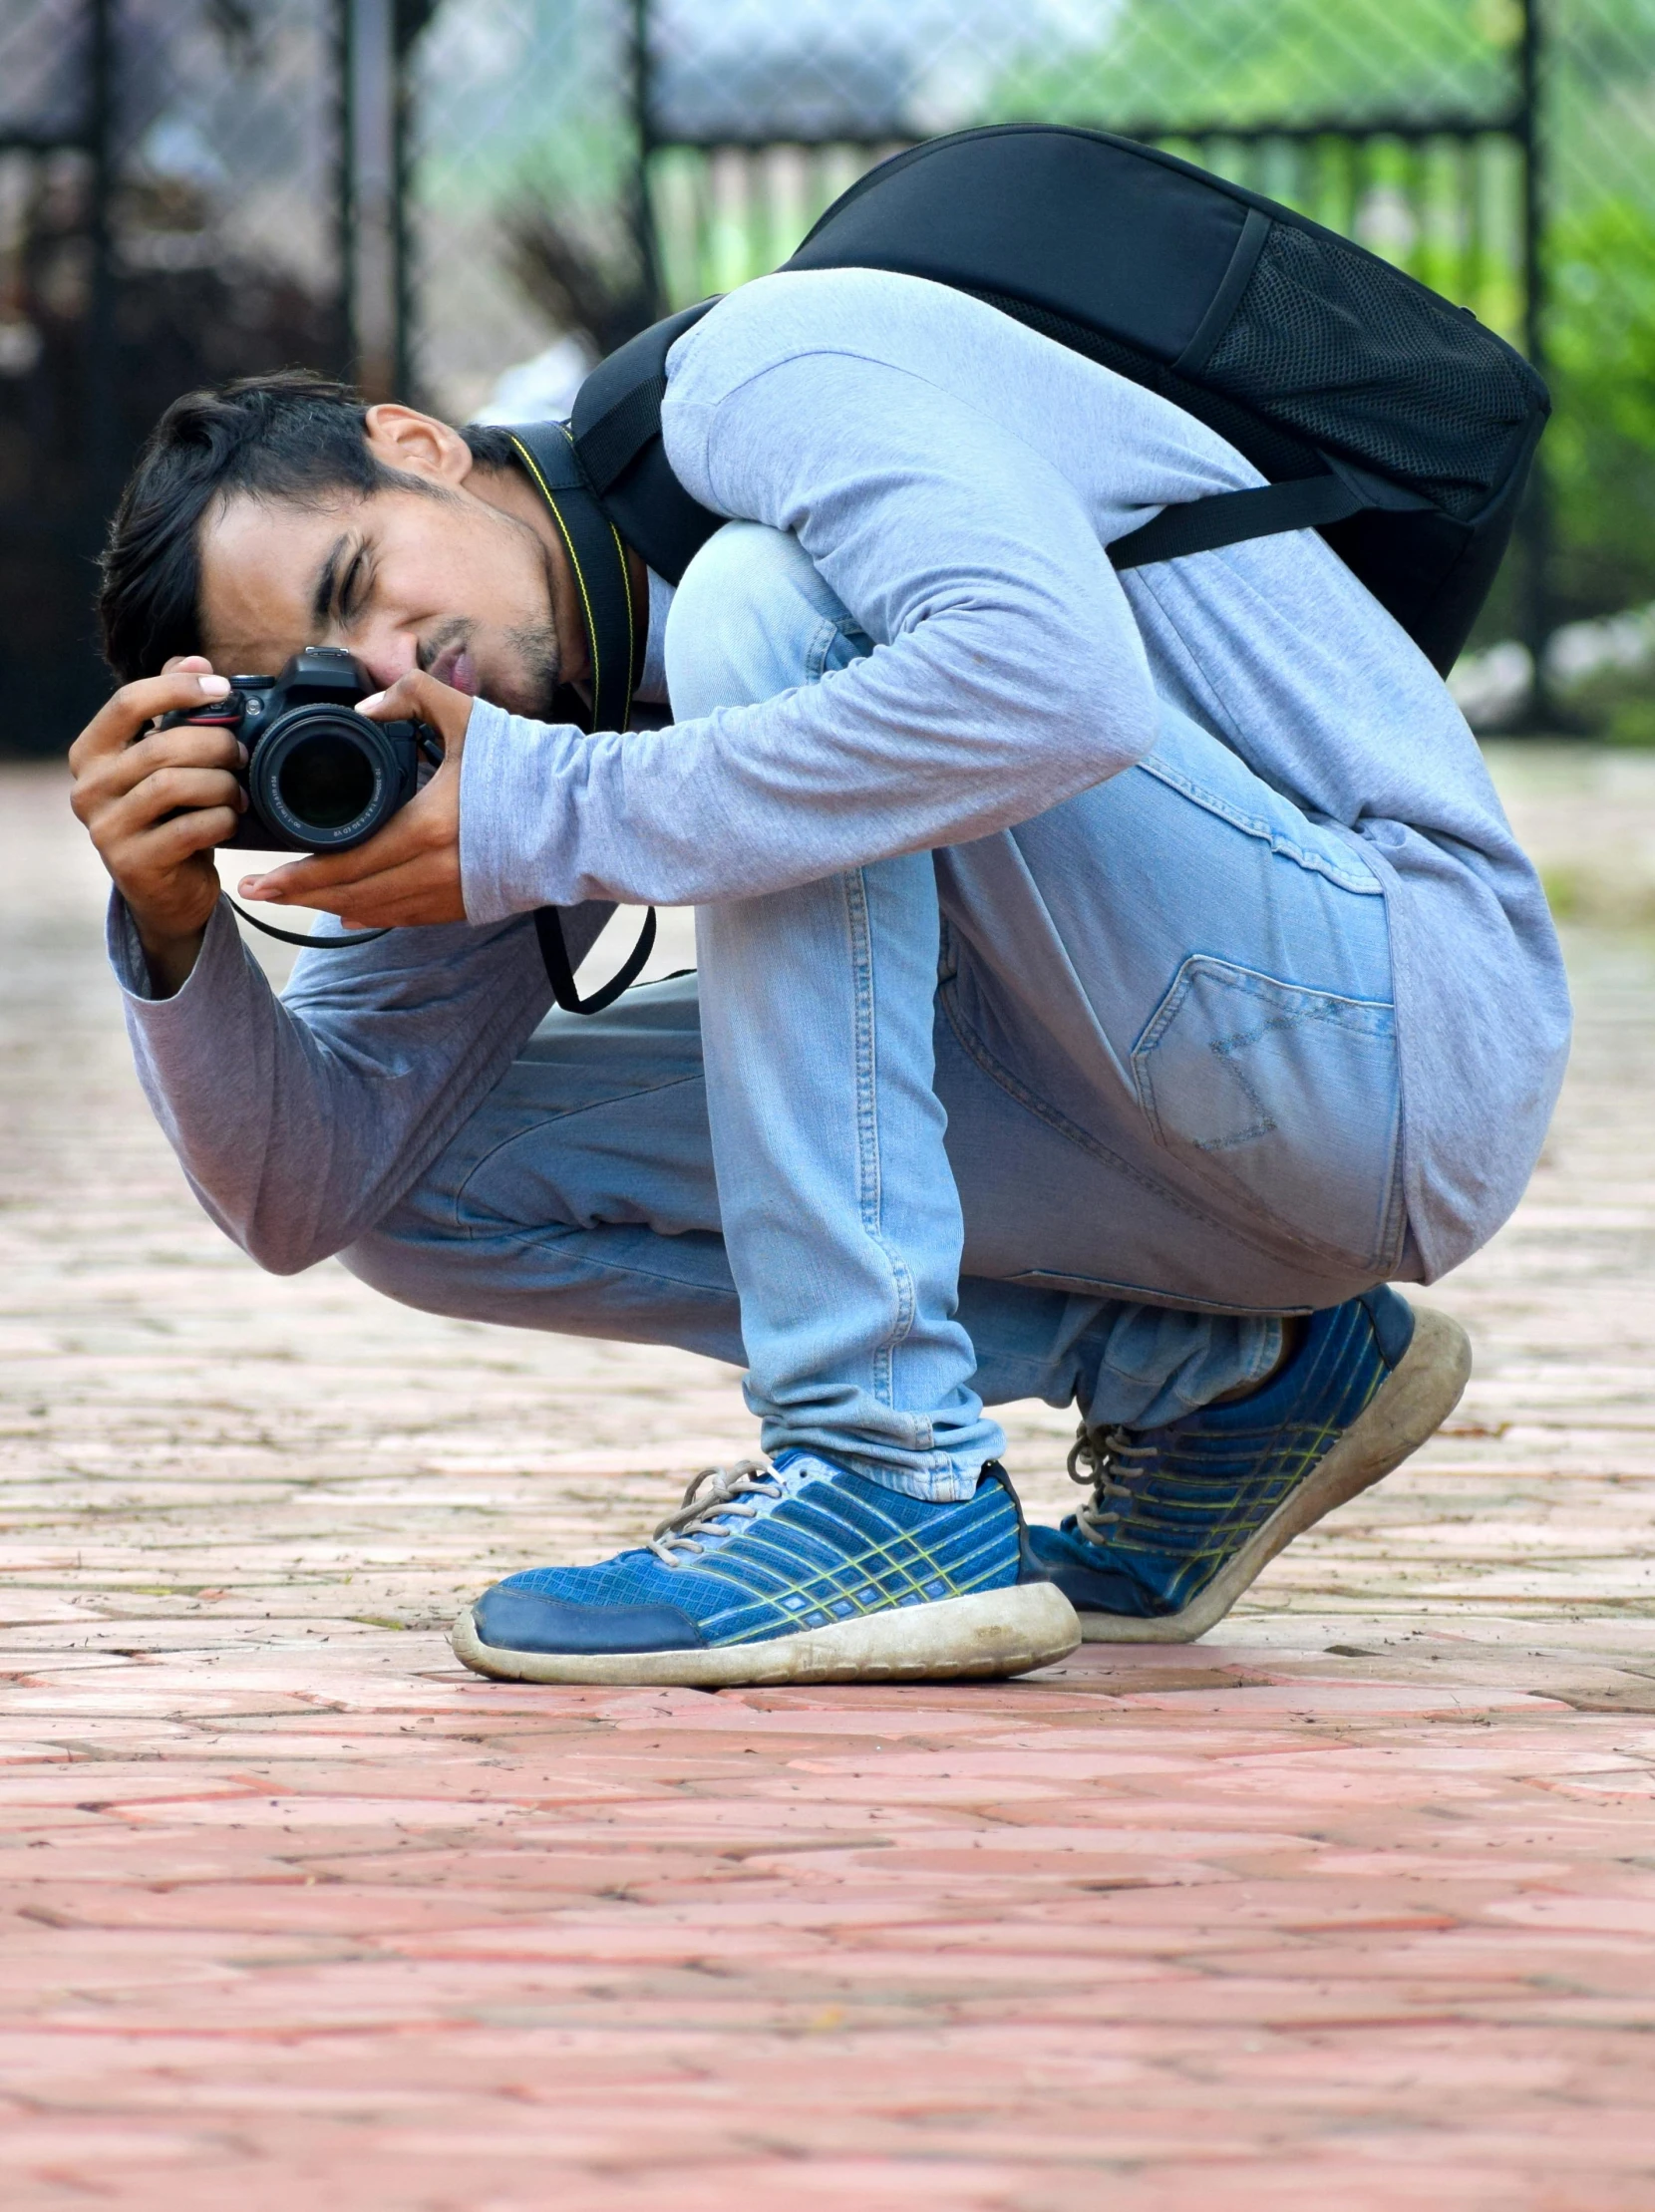 man kneeling and taking picture with camera phone